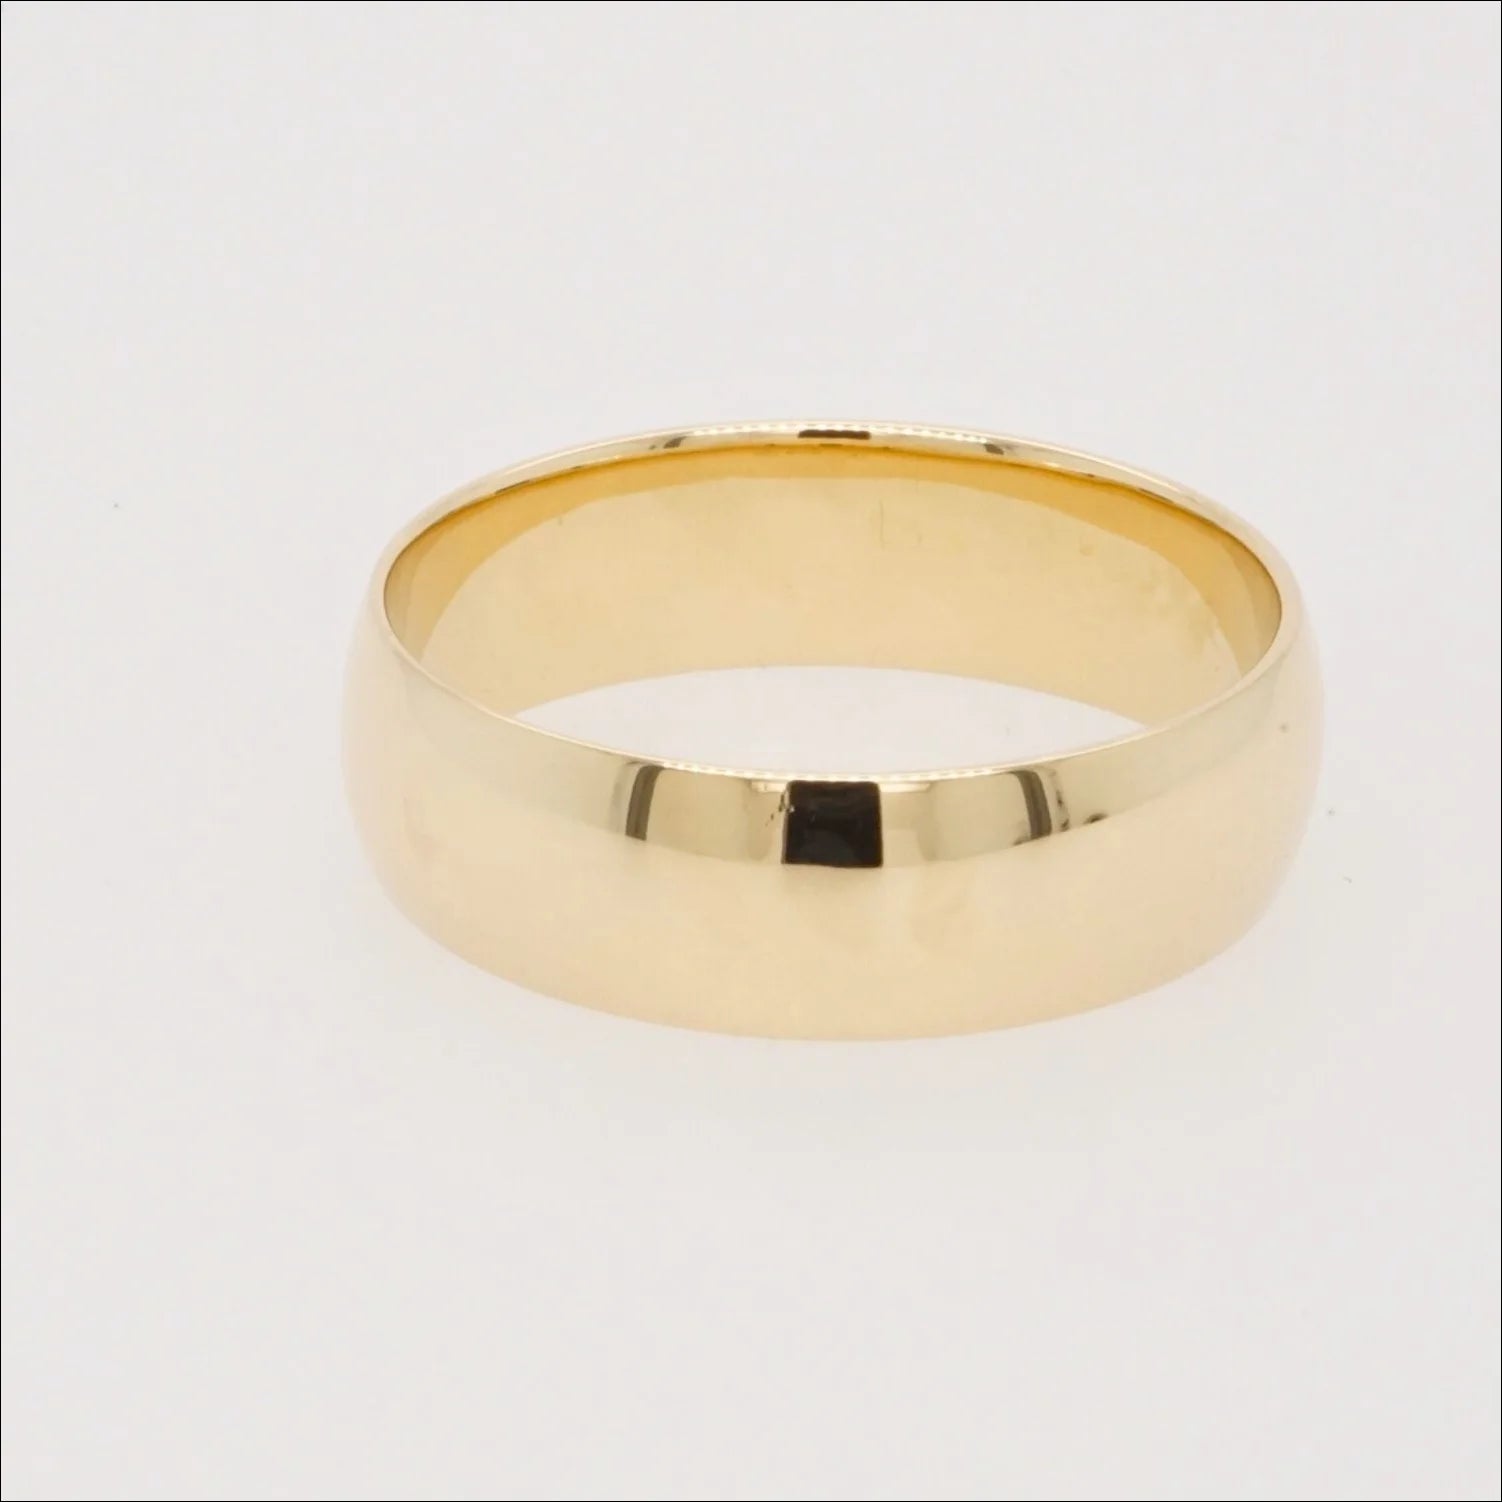 Eternal Love 18k Wedding Band | Home page